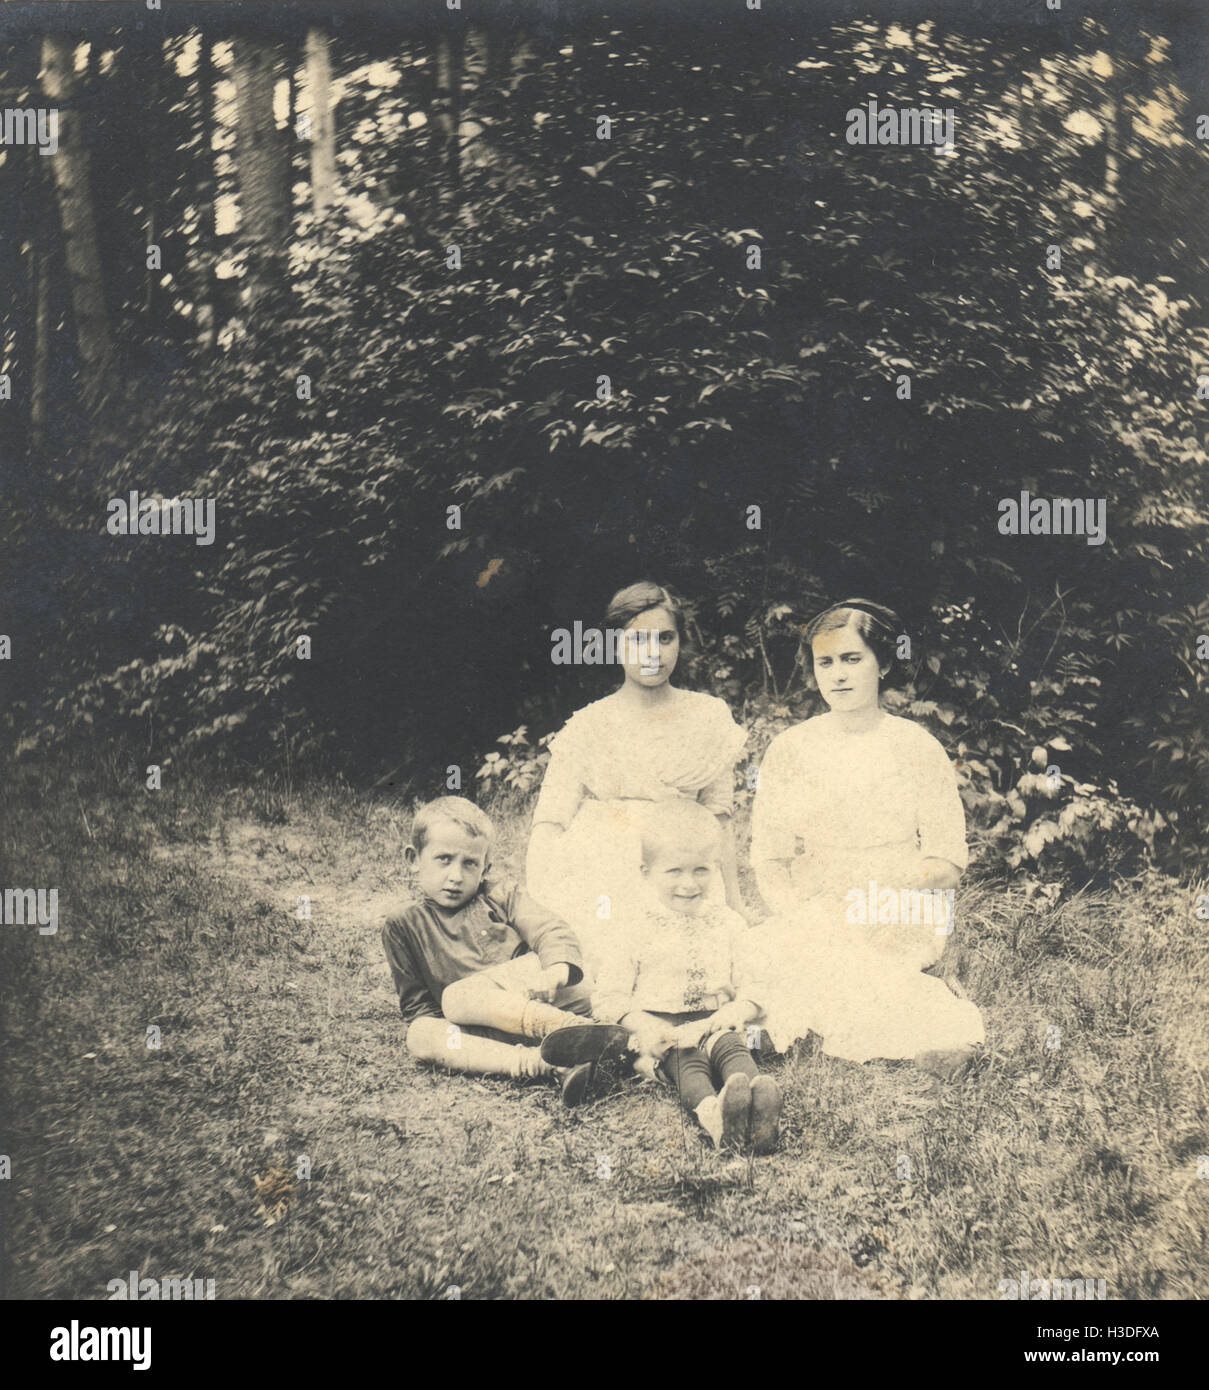 Vintage group portrait of children outdoors, Russia in the late 19th and early 20th century Stock Photo